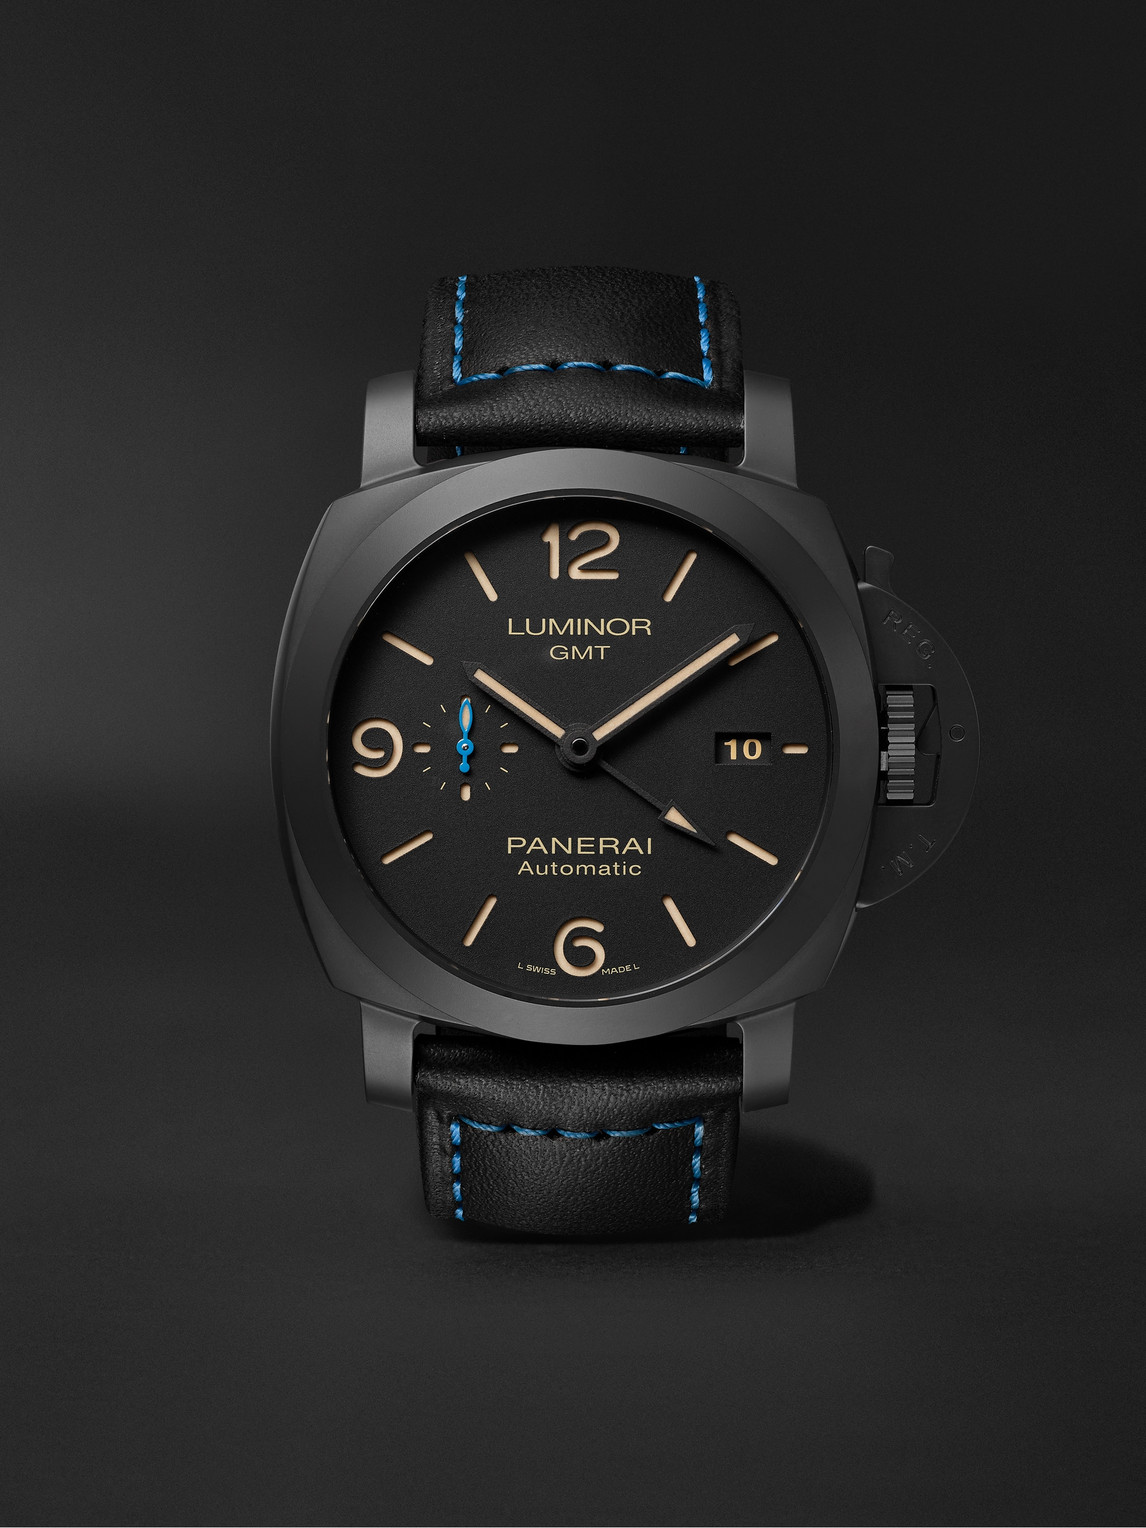 Panerai Luminor 1950 3 Days Gmt Automatic 44mm Ceramic And Leather Watch, Ref. No. Pam01441 In Black